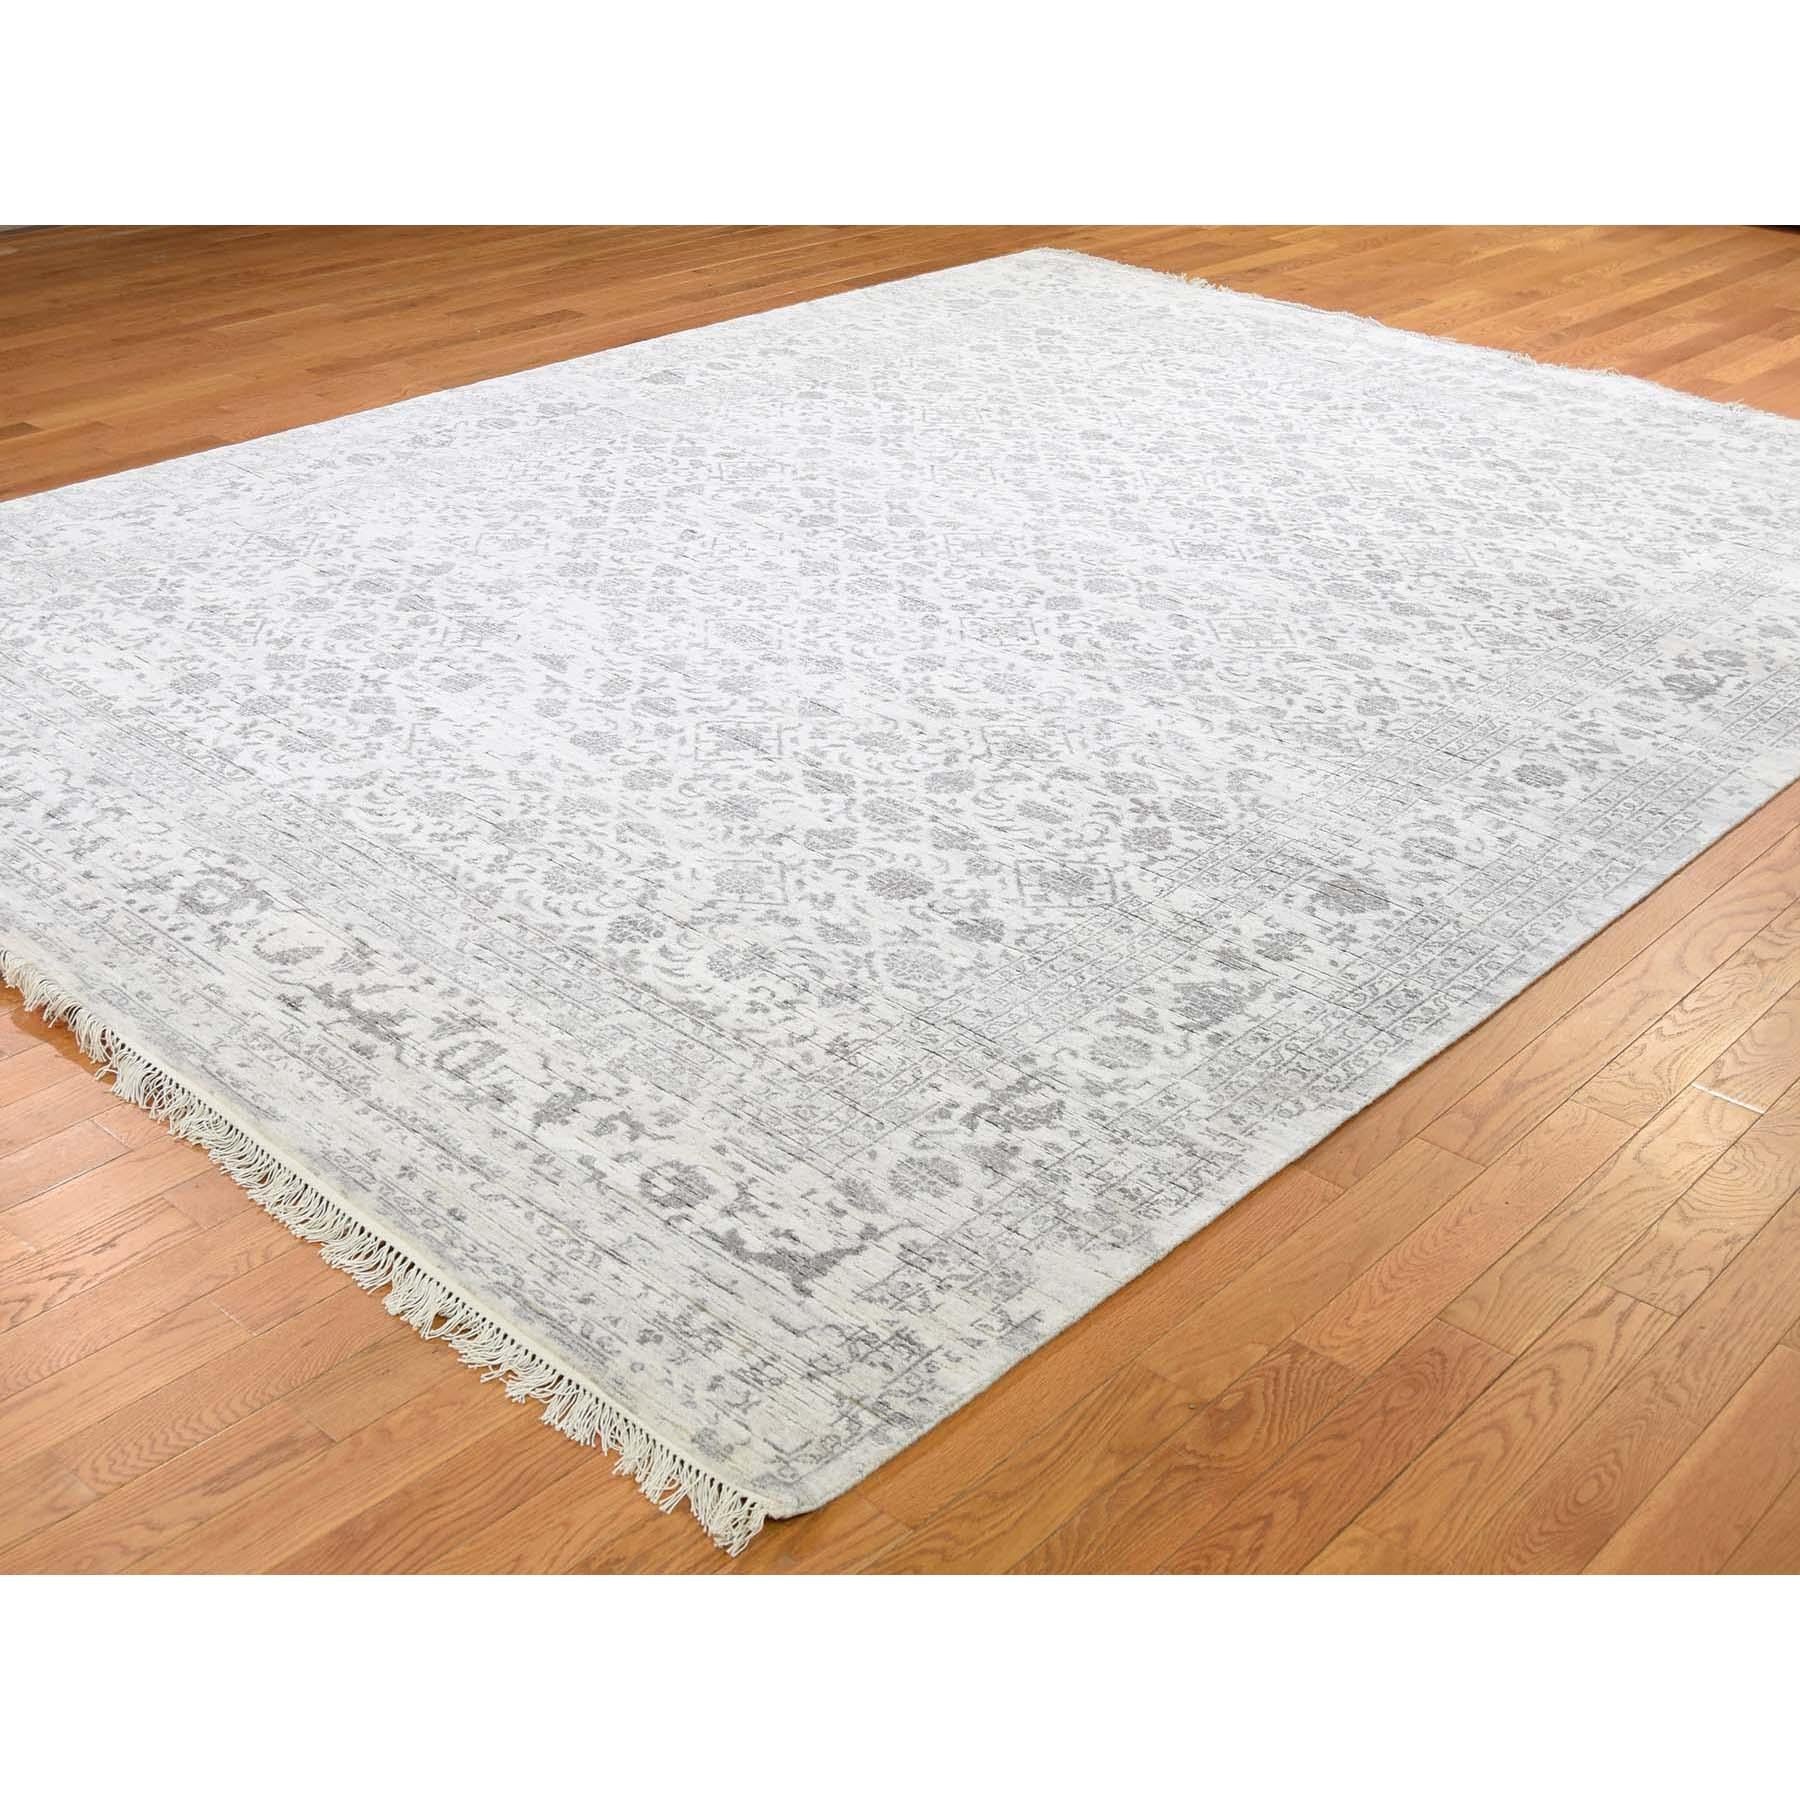 Hand-Knotted Broken Tabriz Mahi Design Wool and Silk Blend Hand Knotted Rug